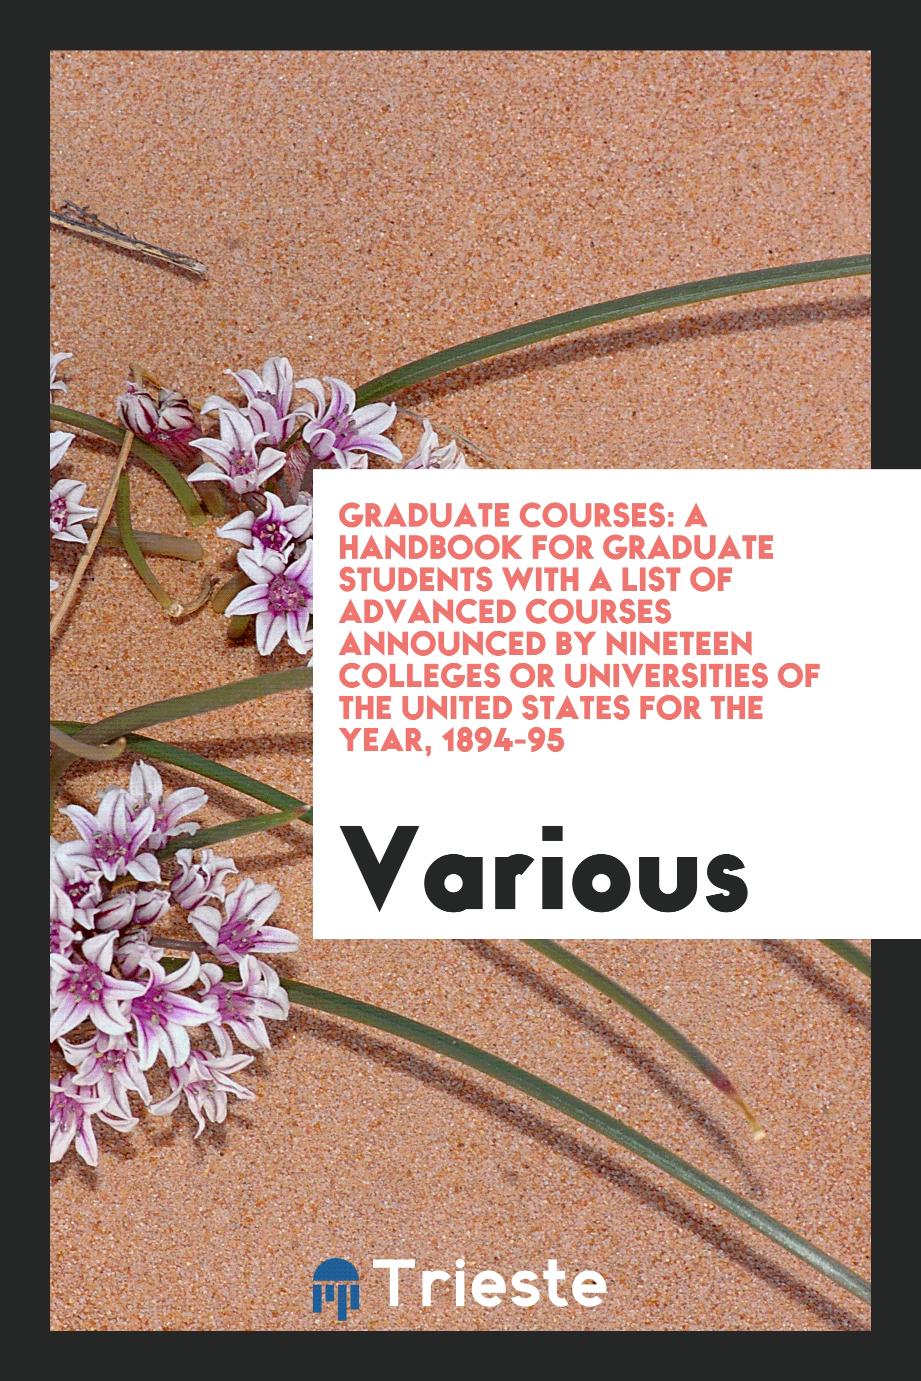 Graduate Courses: A Handbook for Graduate Students with a List of Advanced Courses Announced by Nineteen Colleges or Universities of the United States for the Year, 1894-95